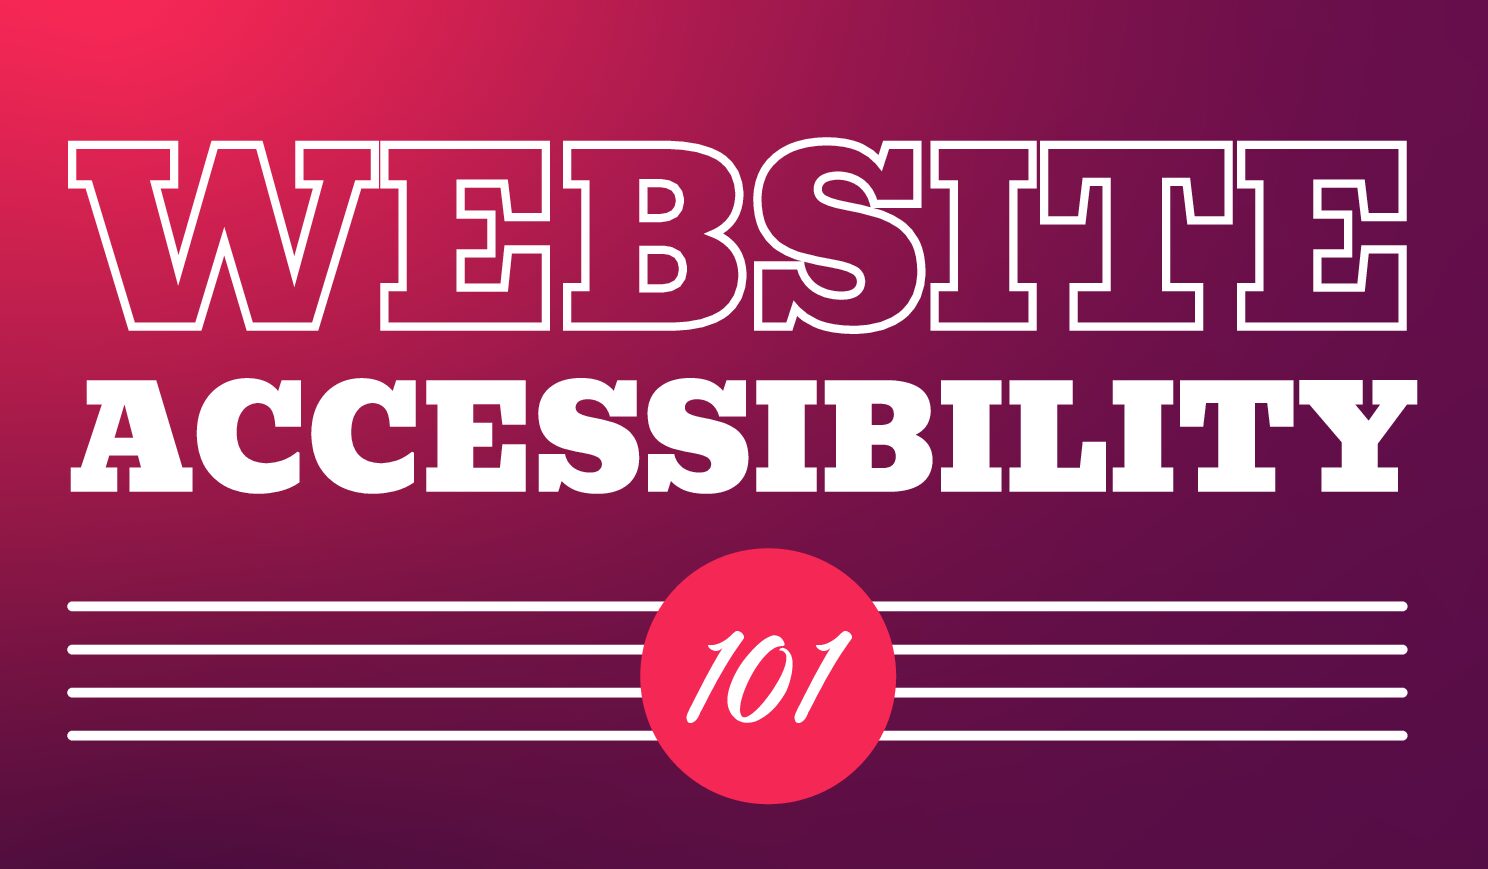 Website Accessibility 101